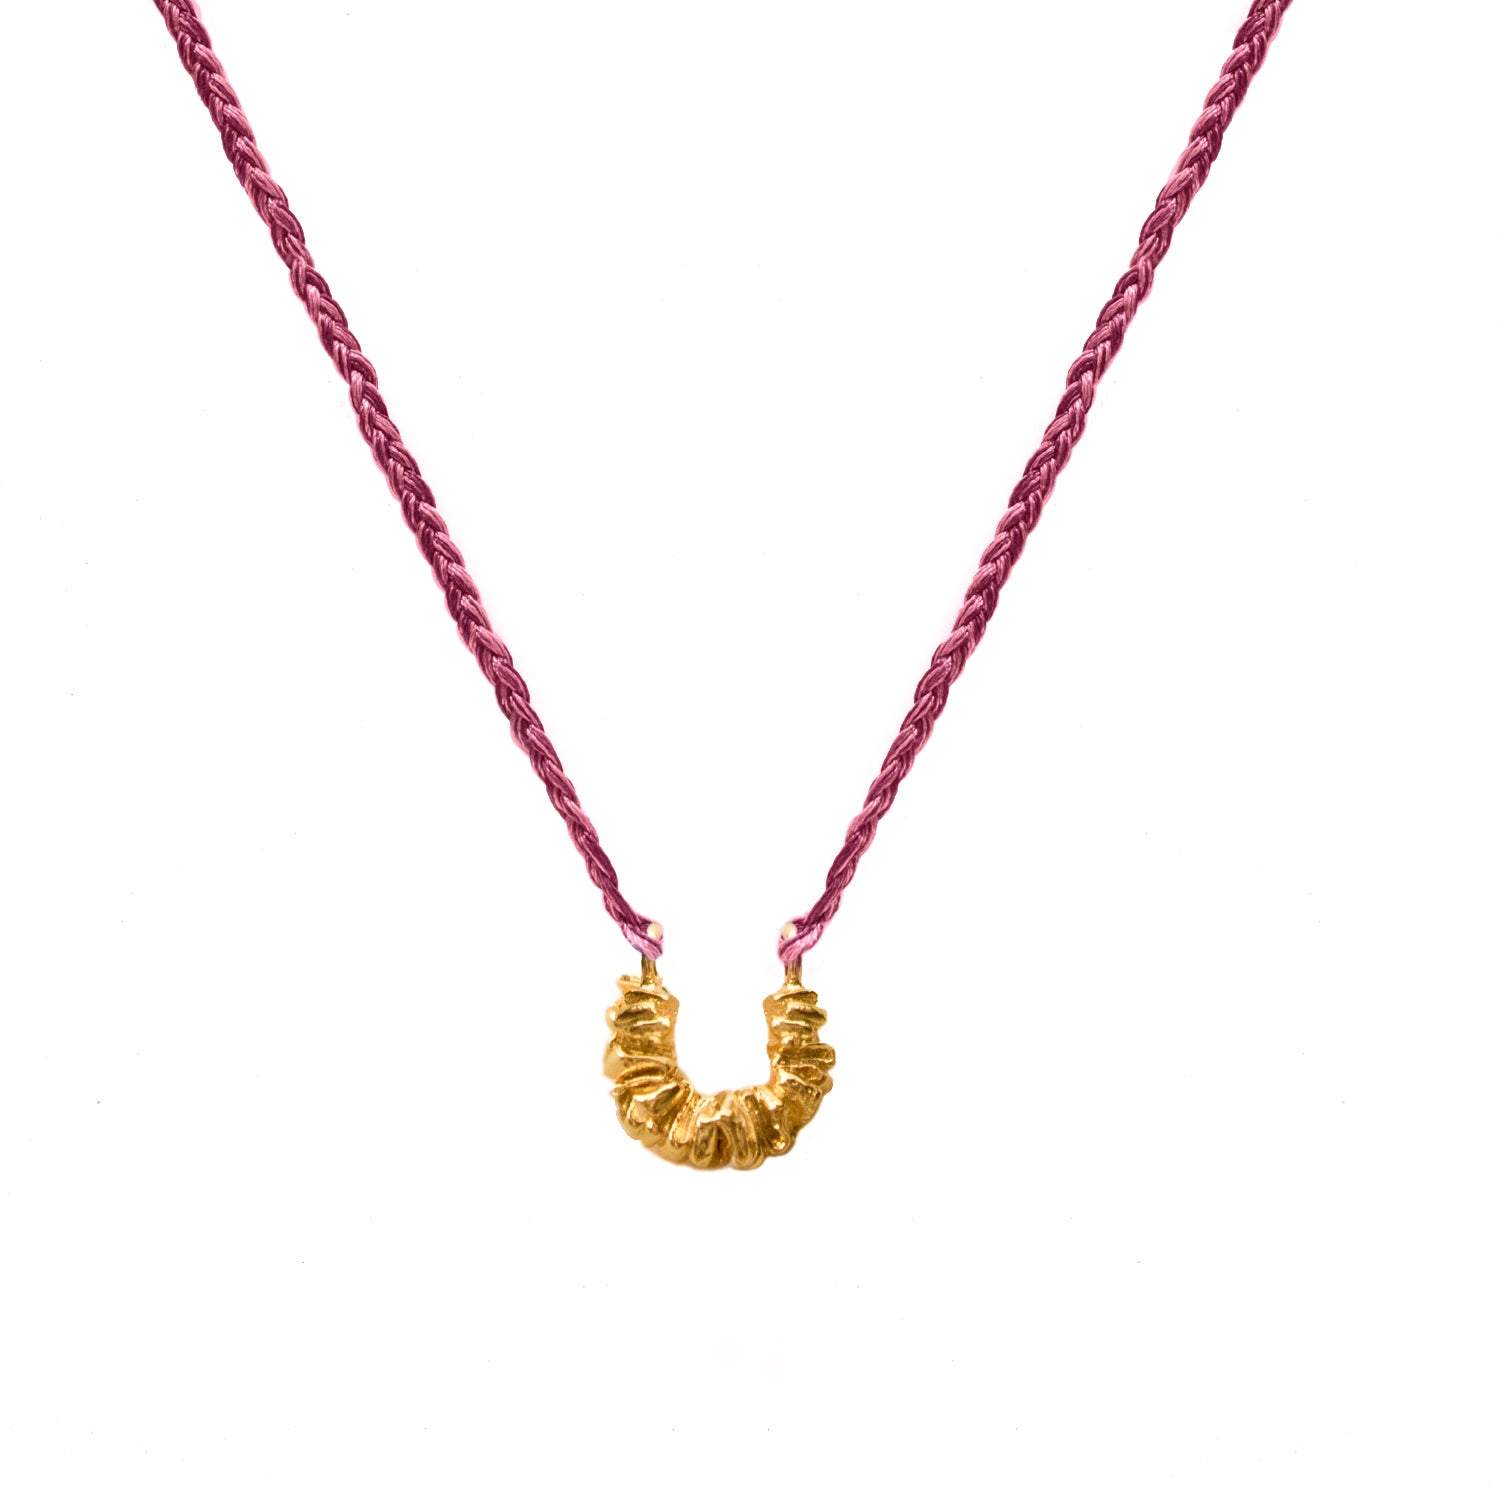 AGARICUS PINK NECKLACE